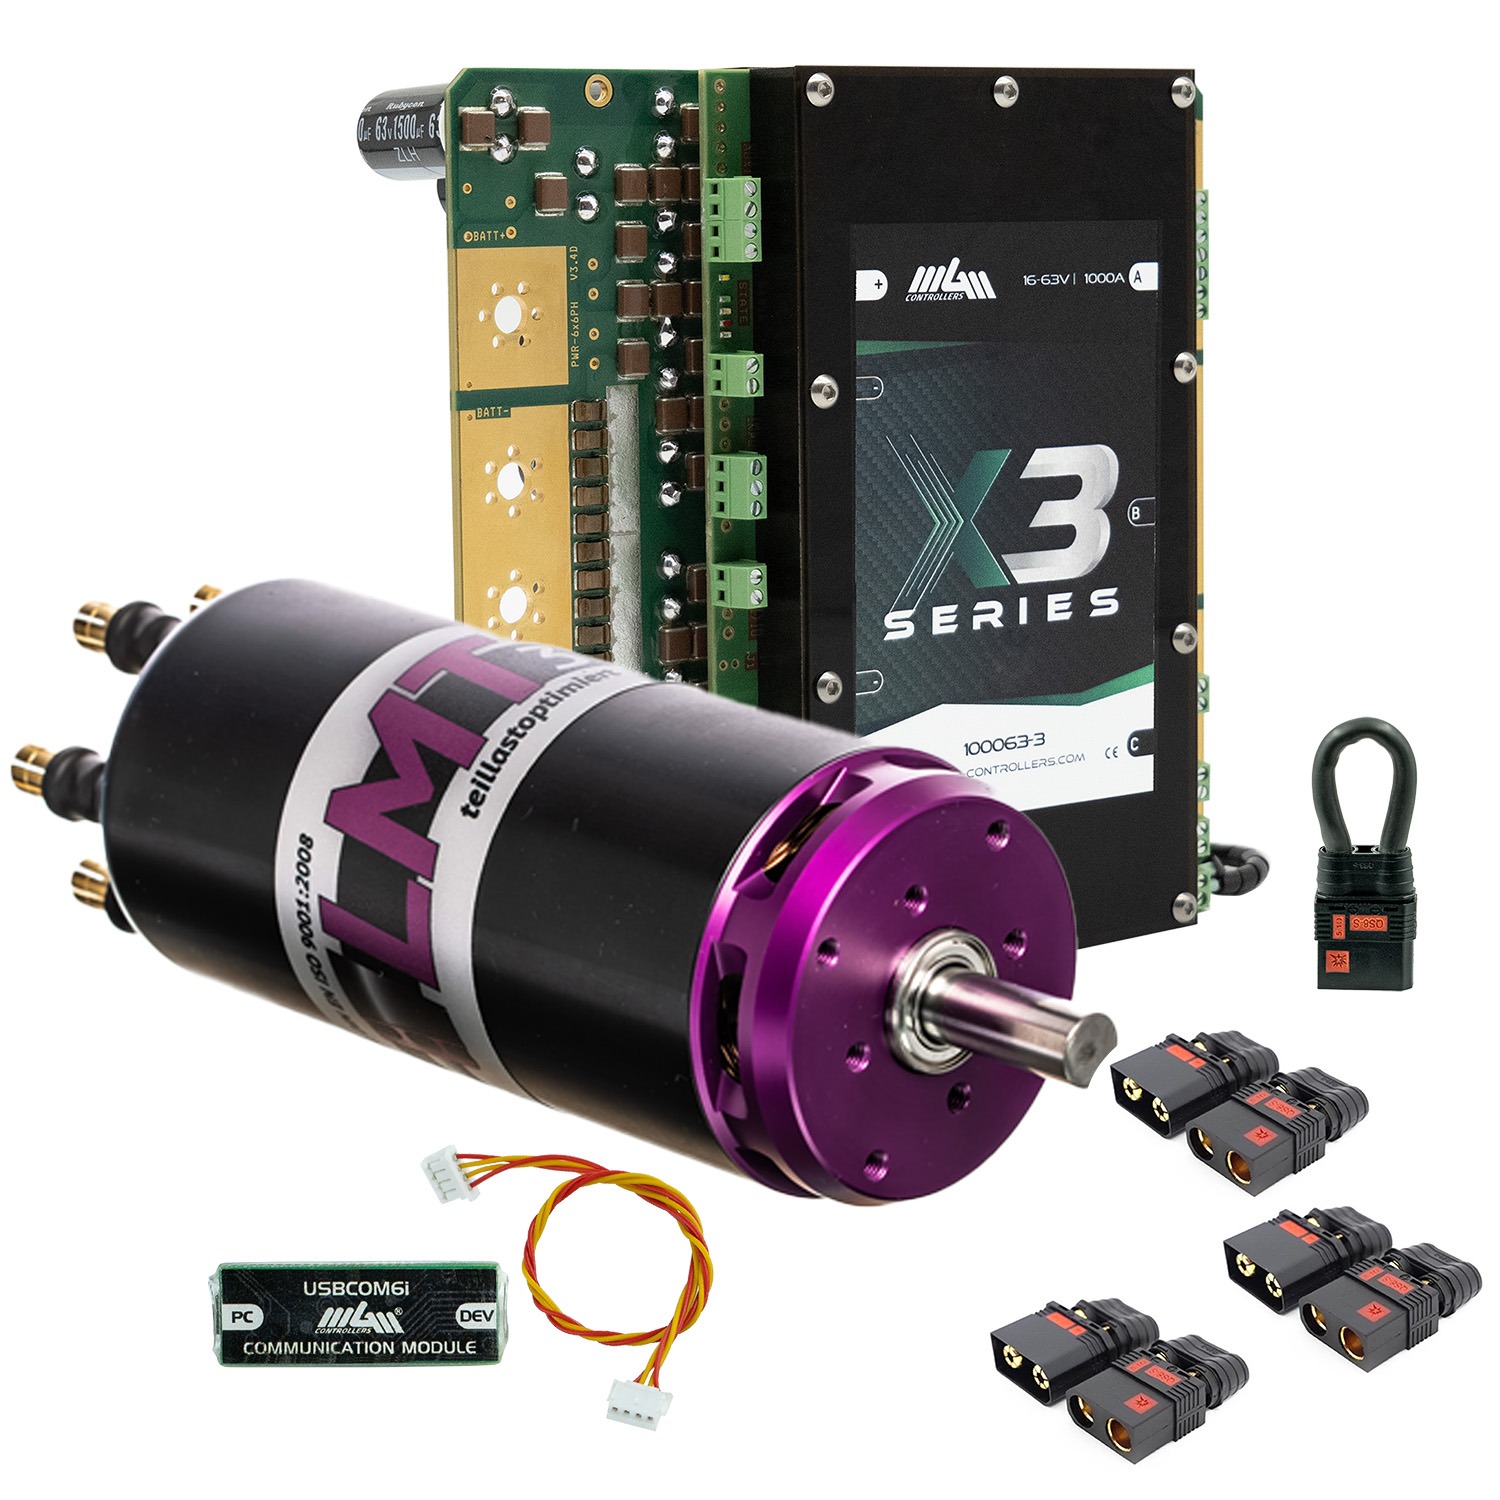 The most powerful X3-SERIES ESC + MOTOR (40kW!)